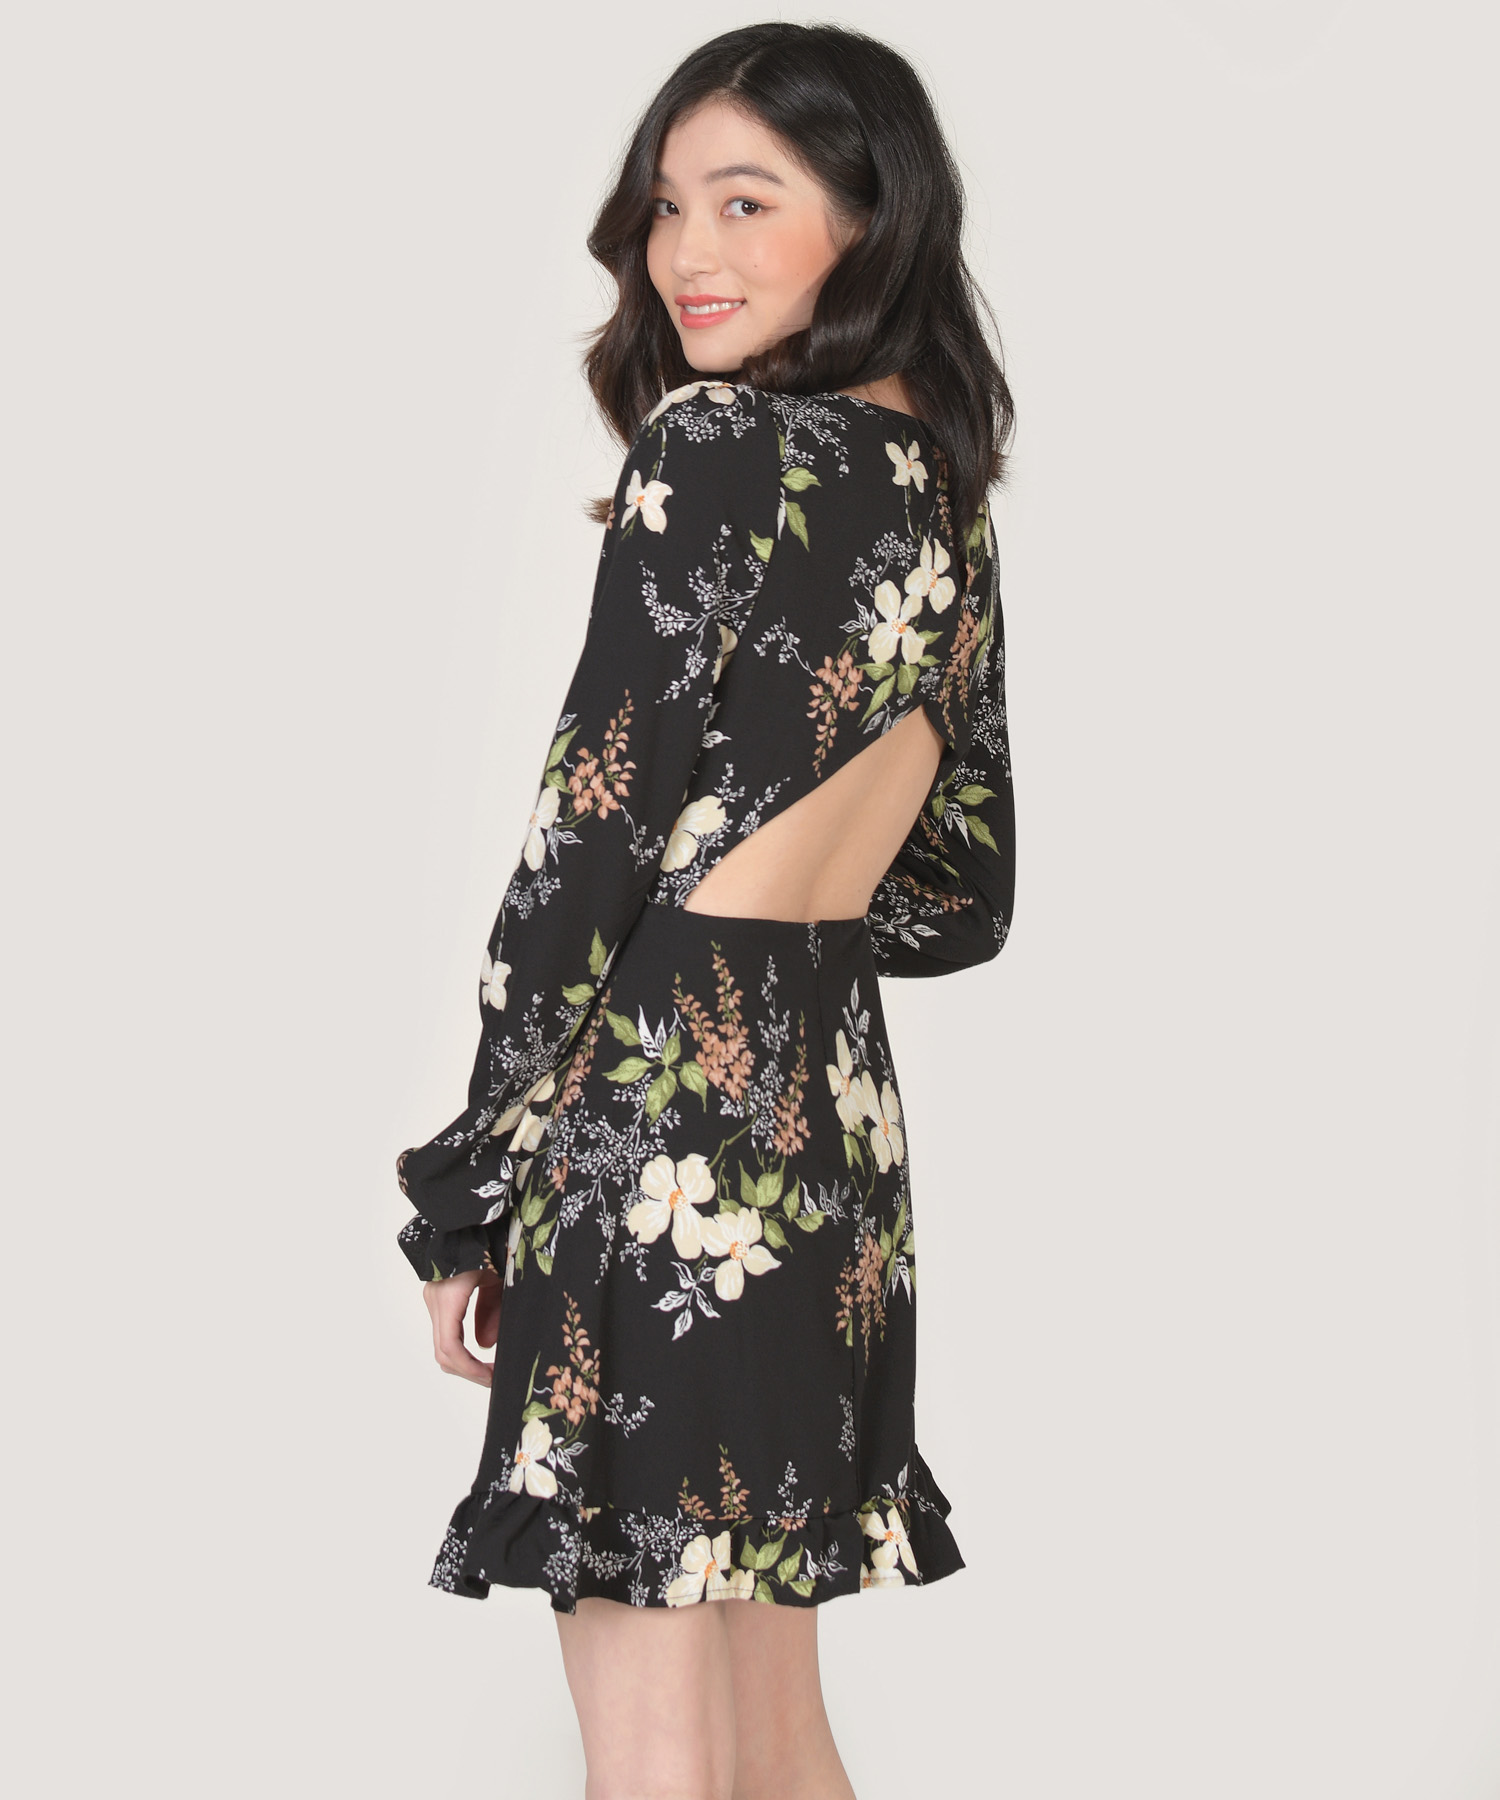 Everly Floral Dress